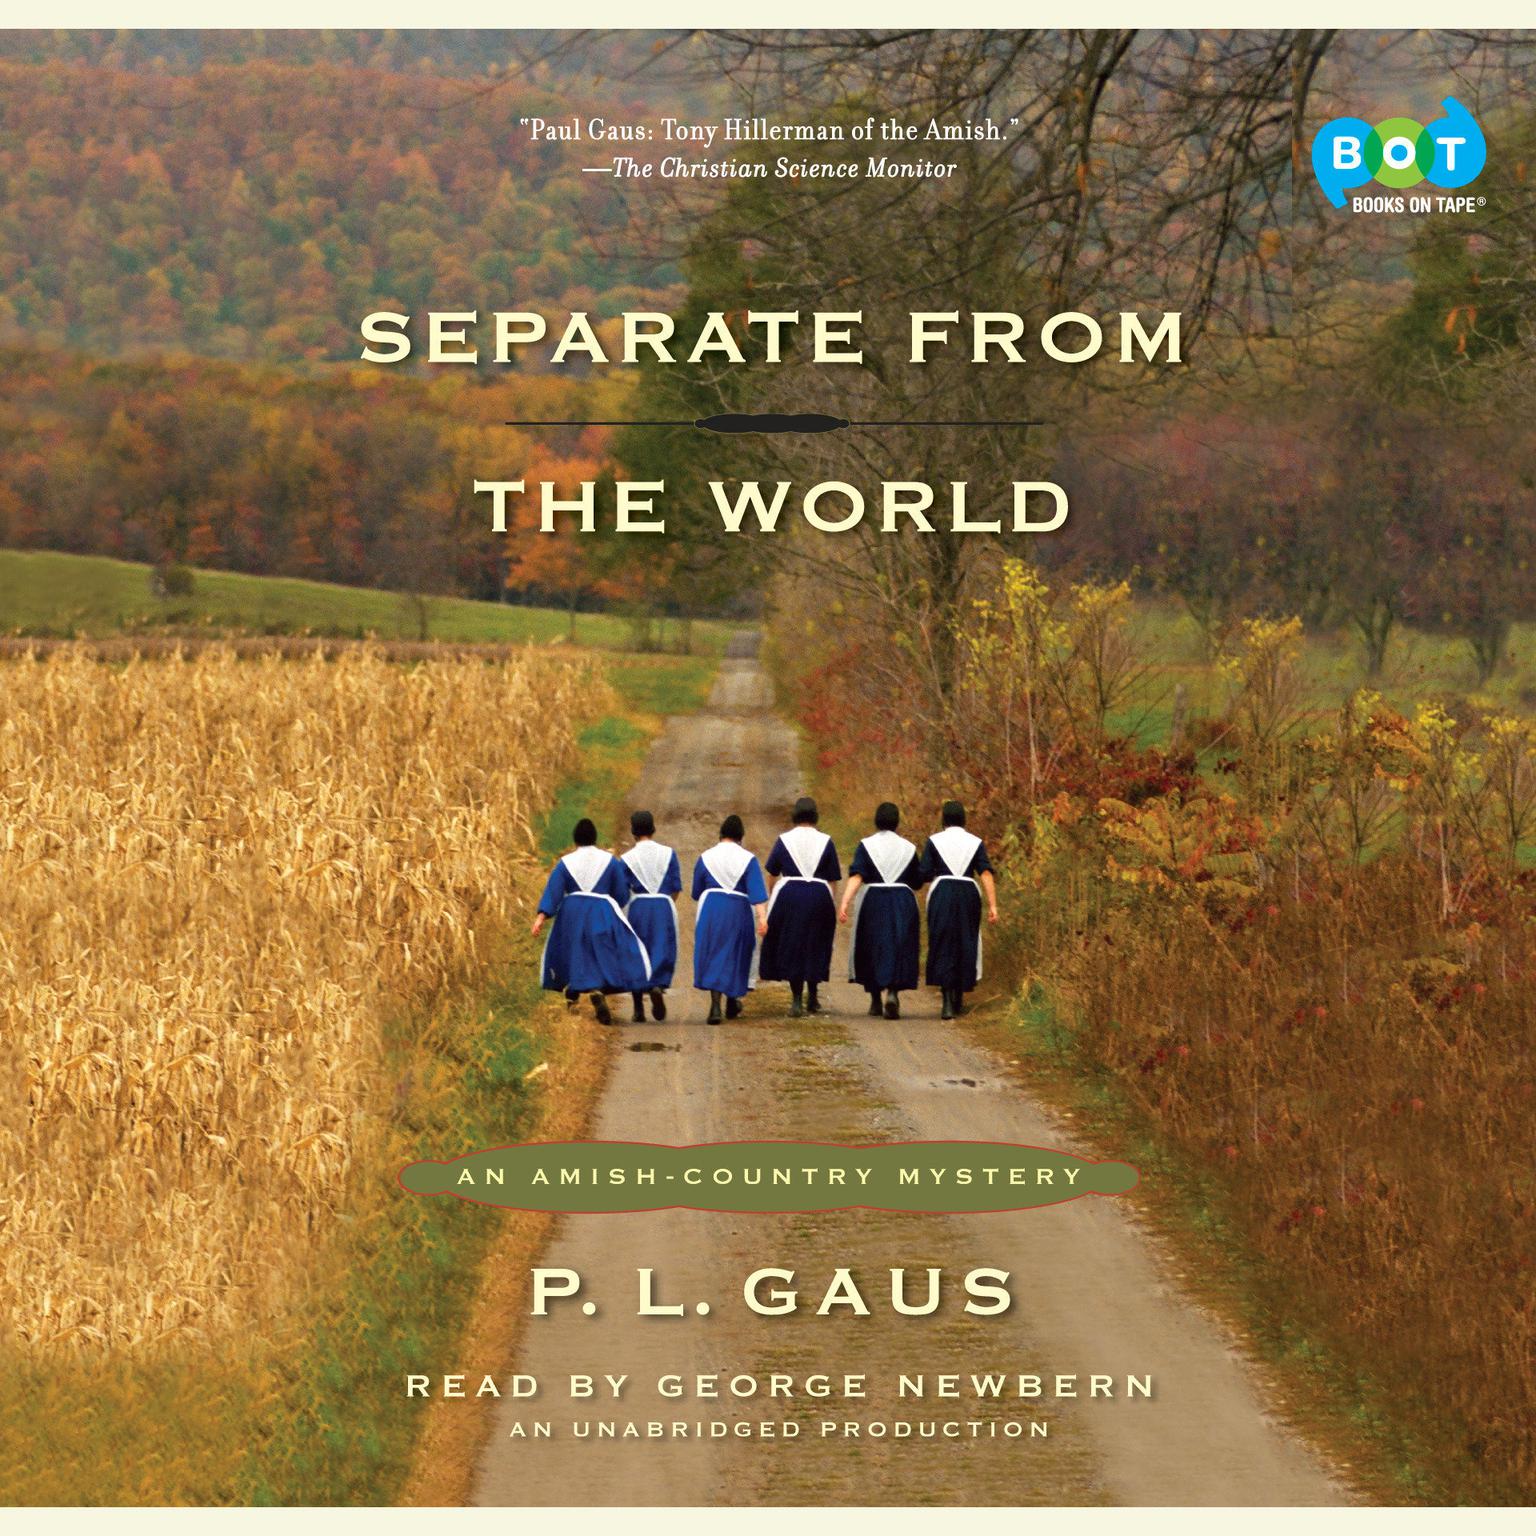 Separate from the World: An Amish-Country Mystery (#6) Audiobook, by P. L. Gaus